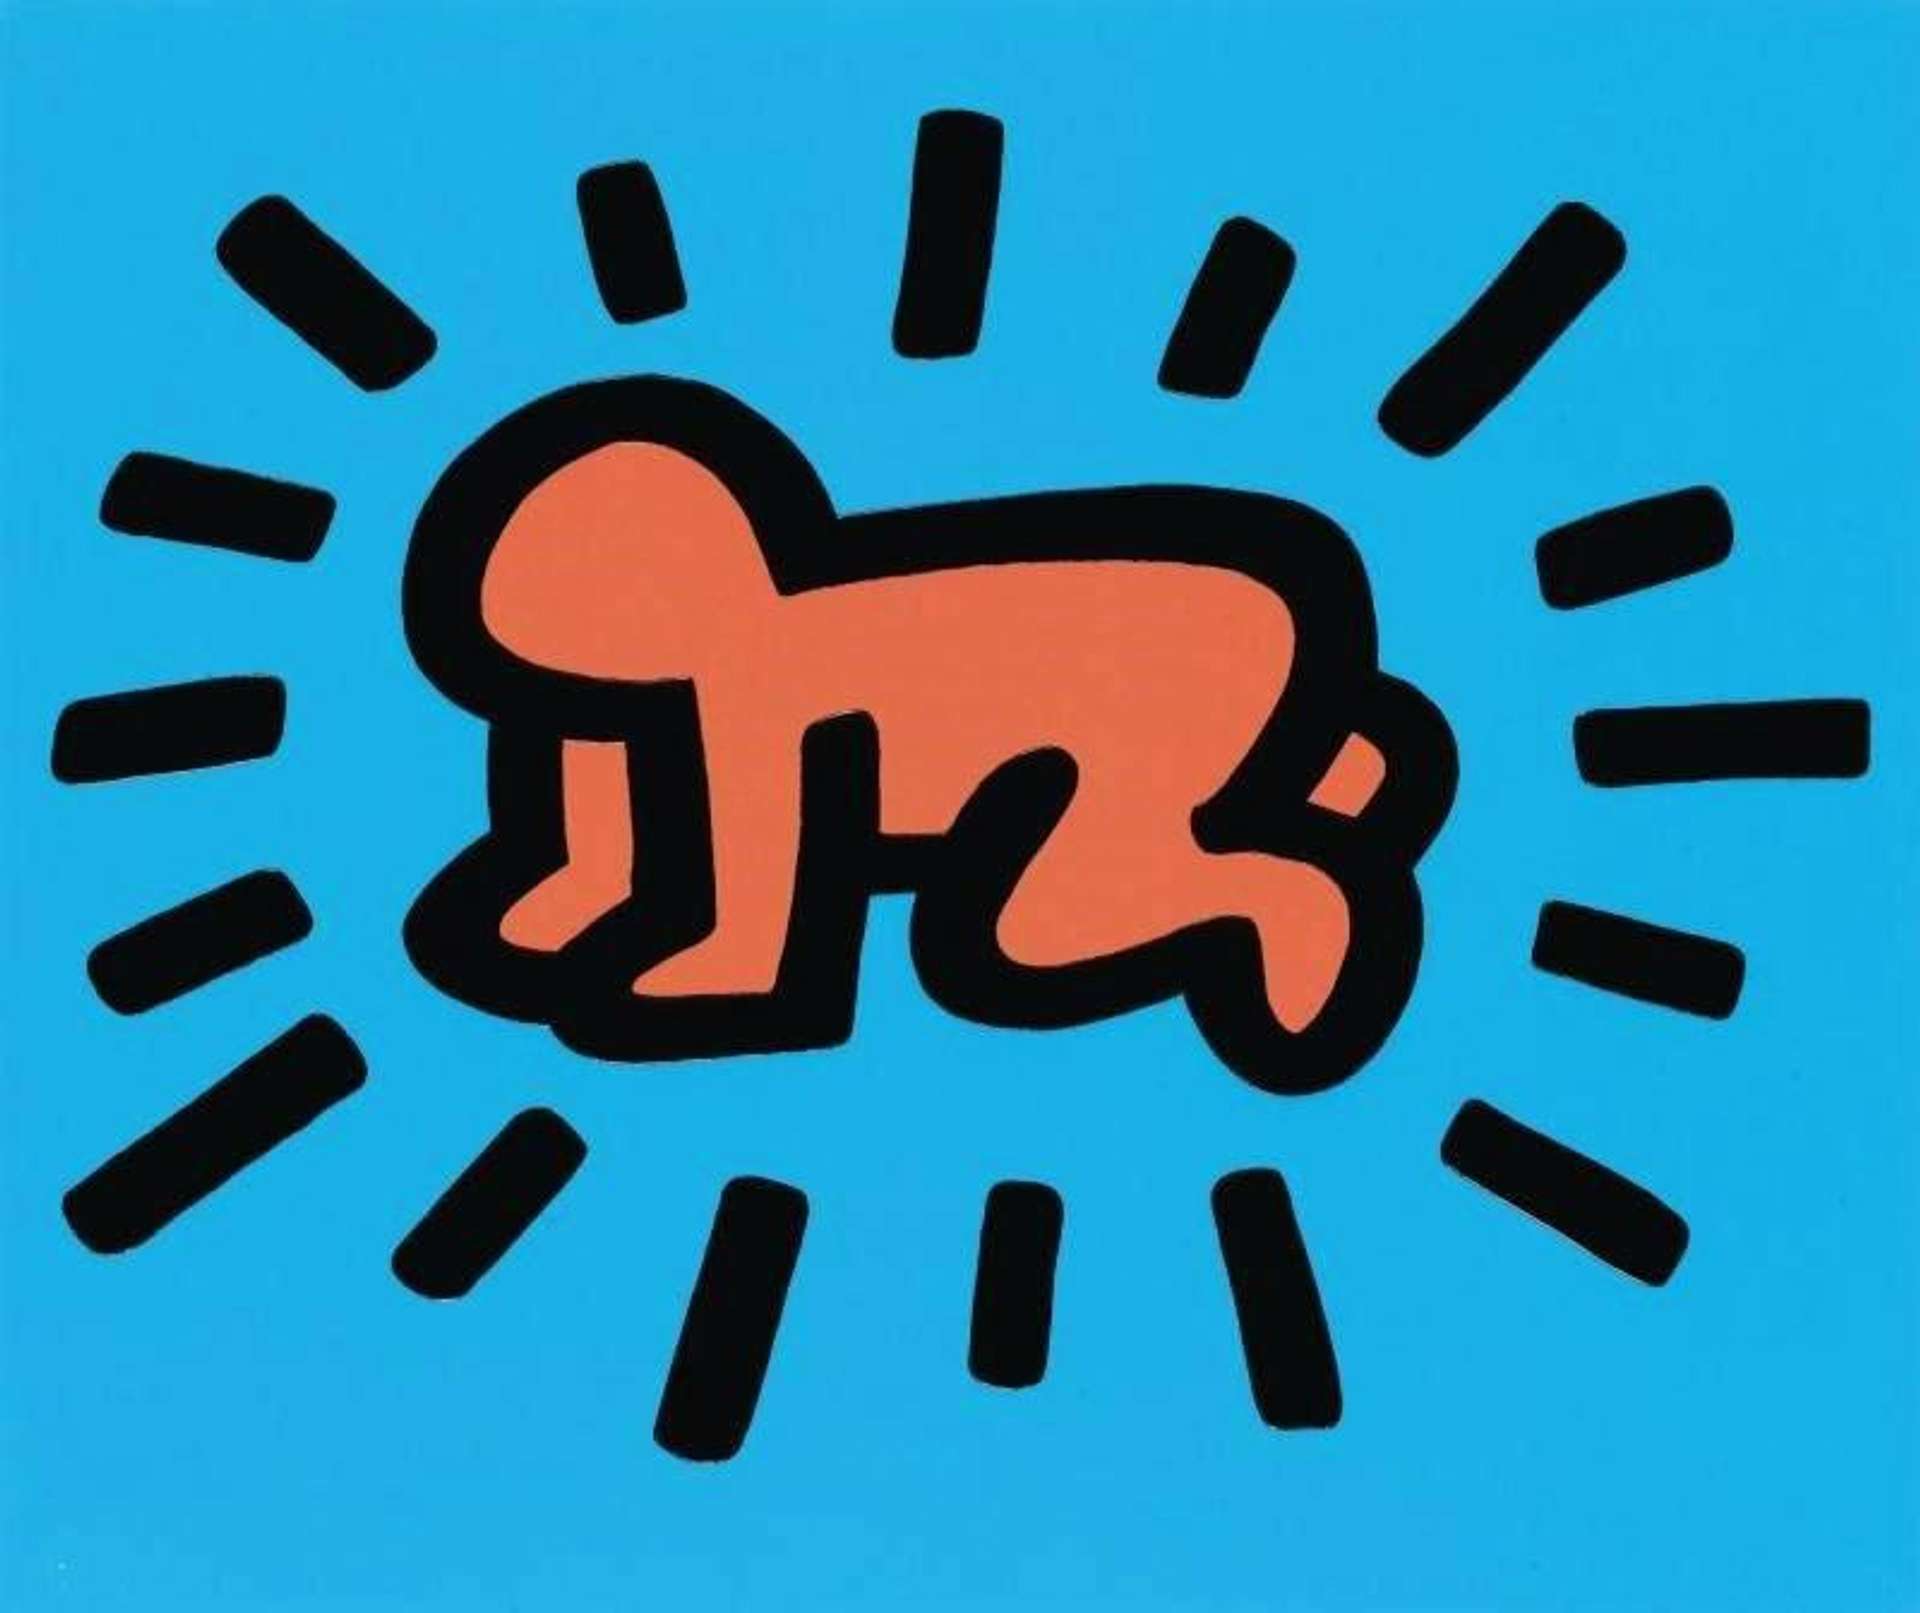 Keith Haring’s Radiant Baby: A Symbol Transcending Art and Religion